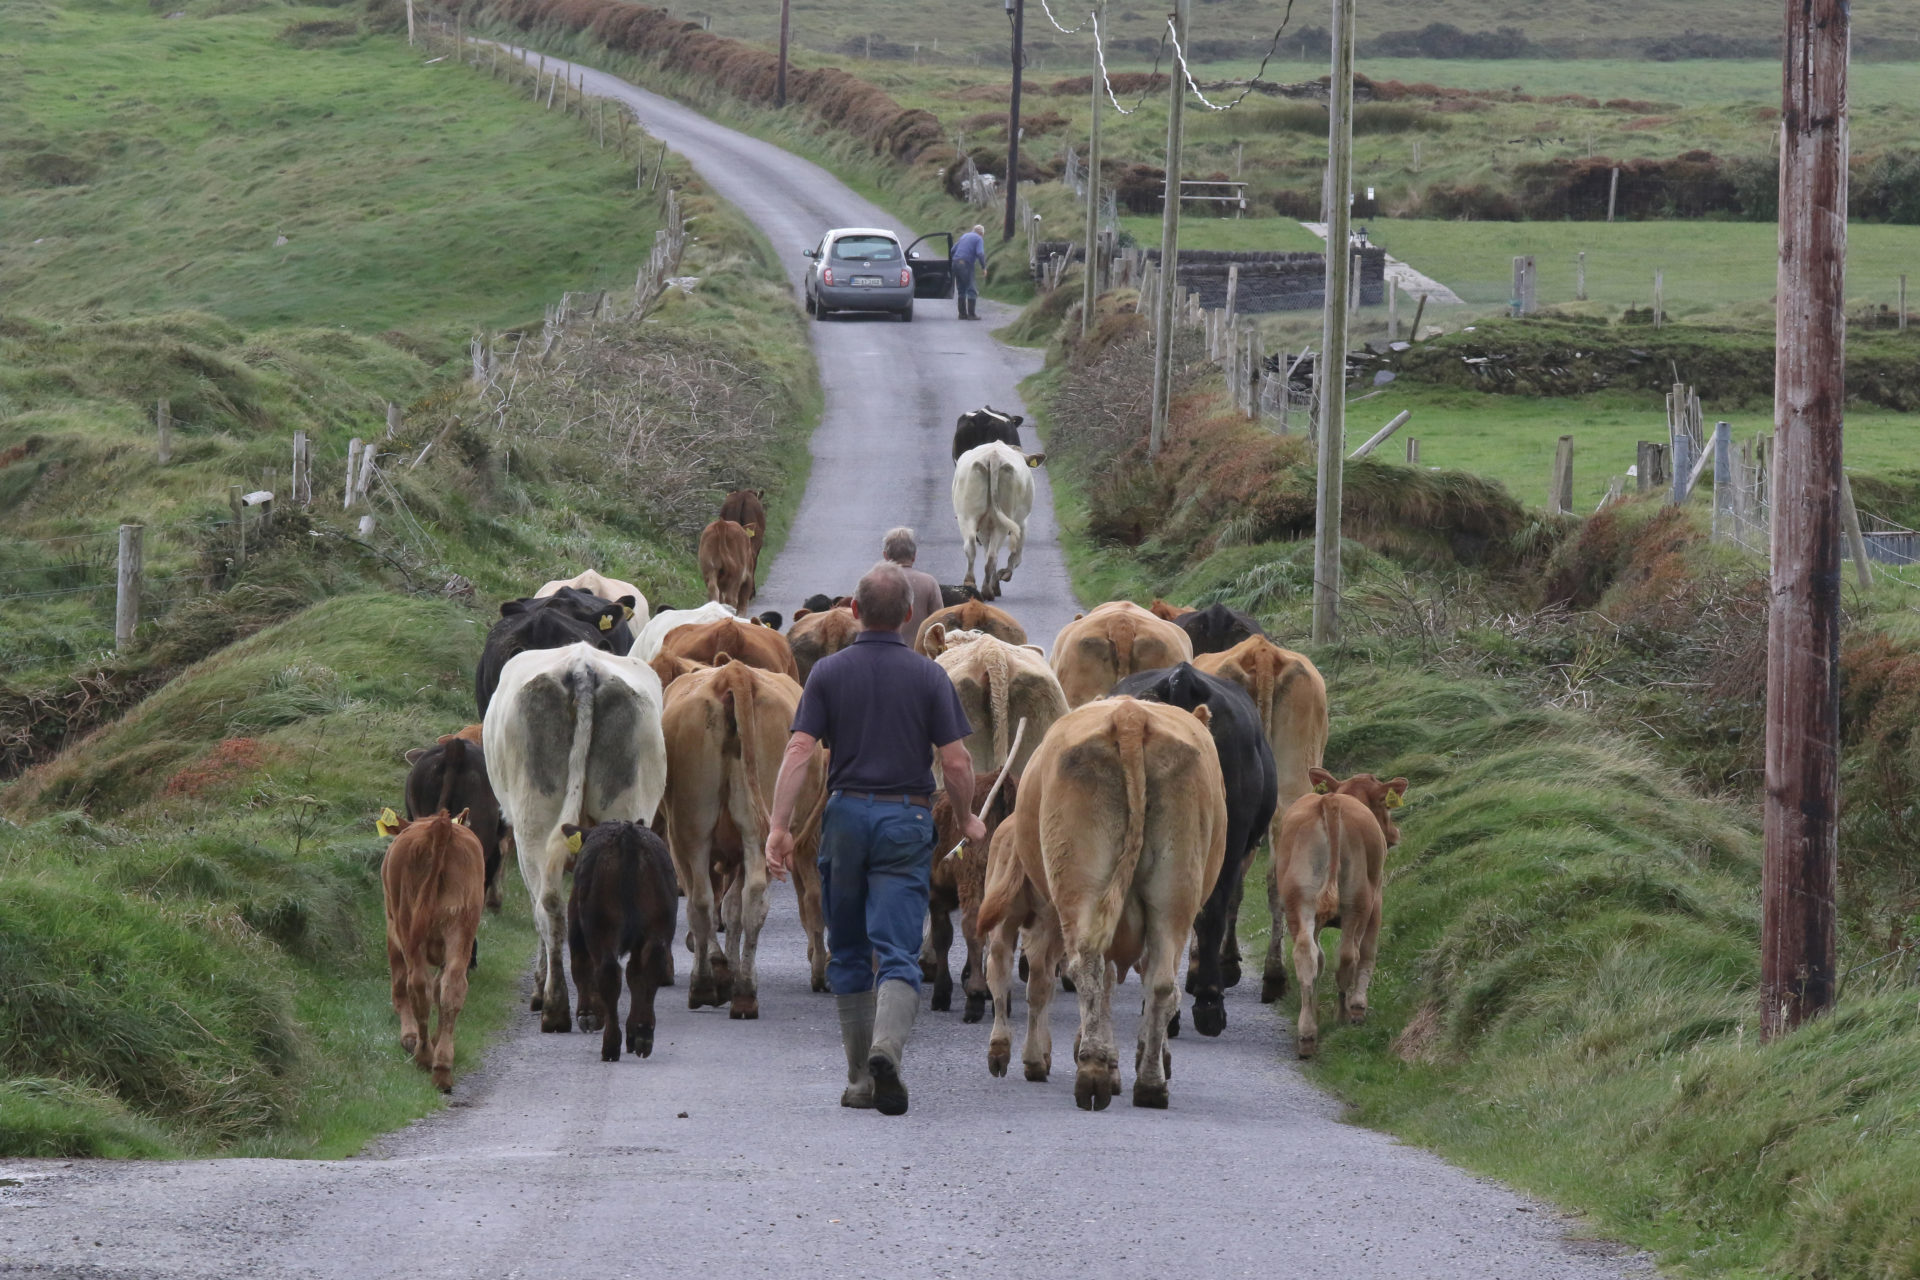 Farmer in Ireland walking behind a herd of cows on a narrow country road on Valentia Island in County Kerry, Ireland.